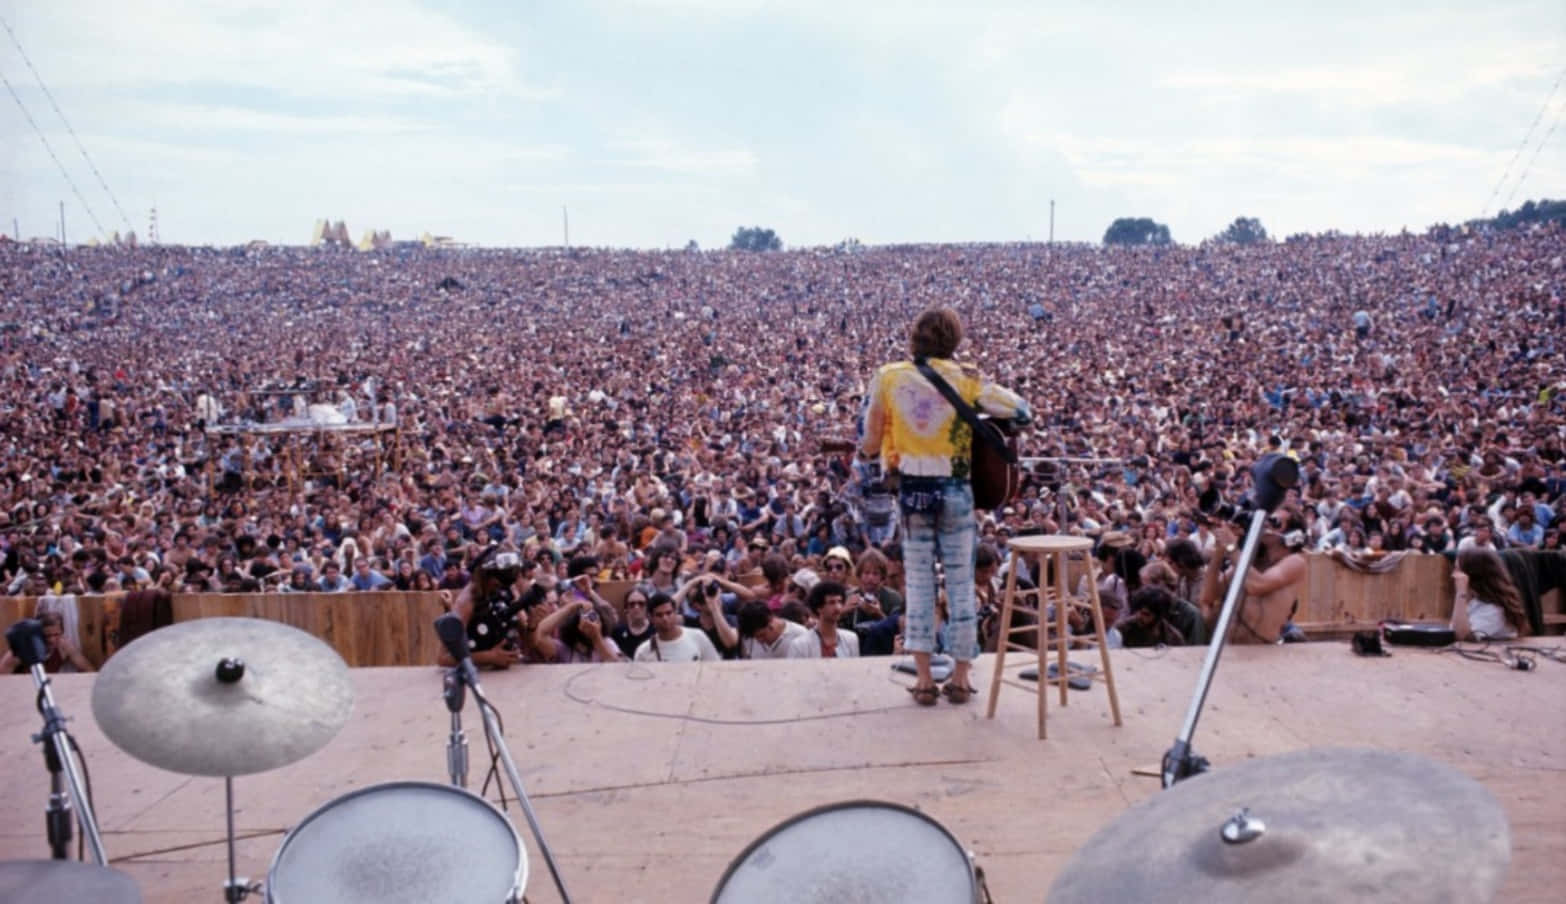 A peaceful field of flowers and a clear blue sky encapsulate the essence of Woodstock